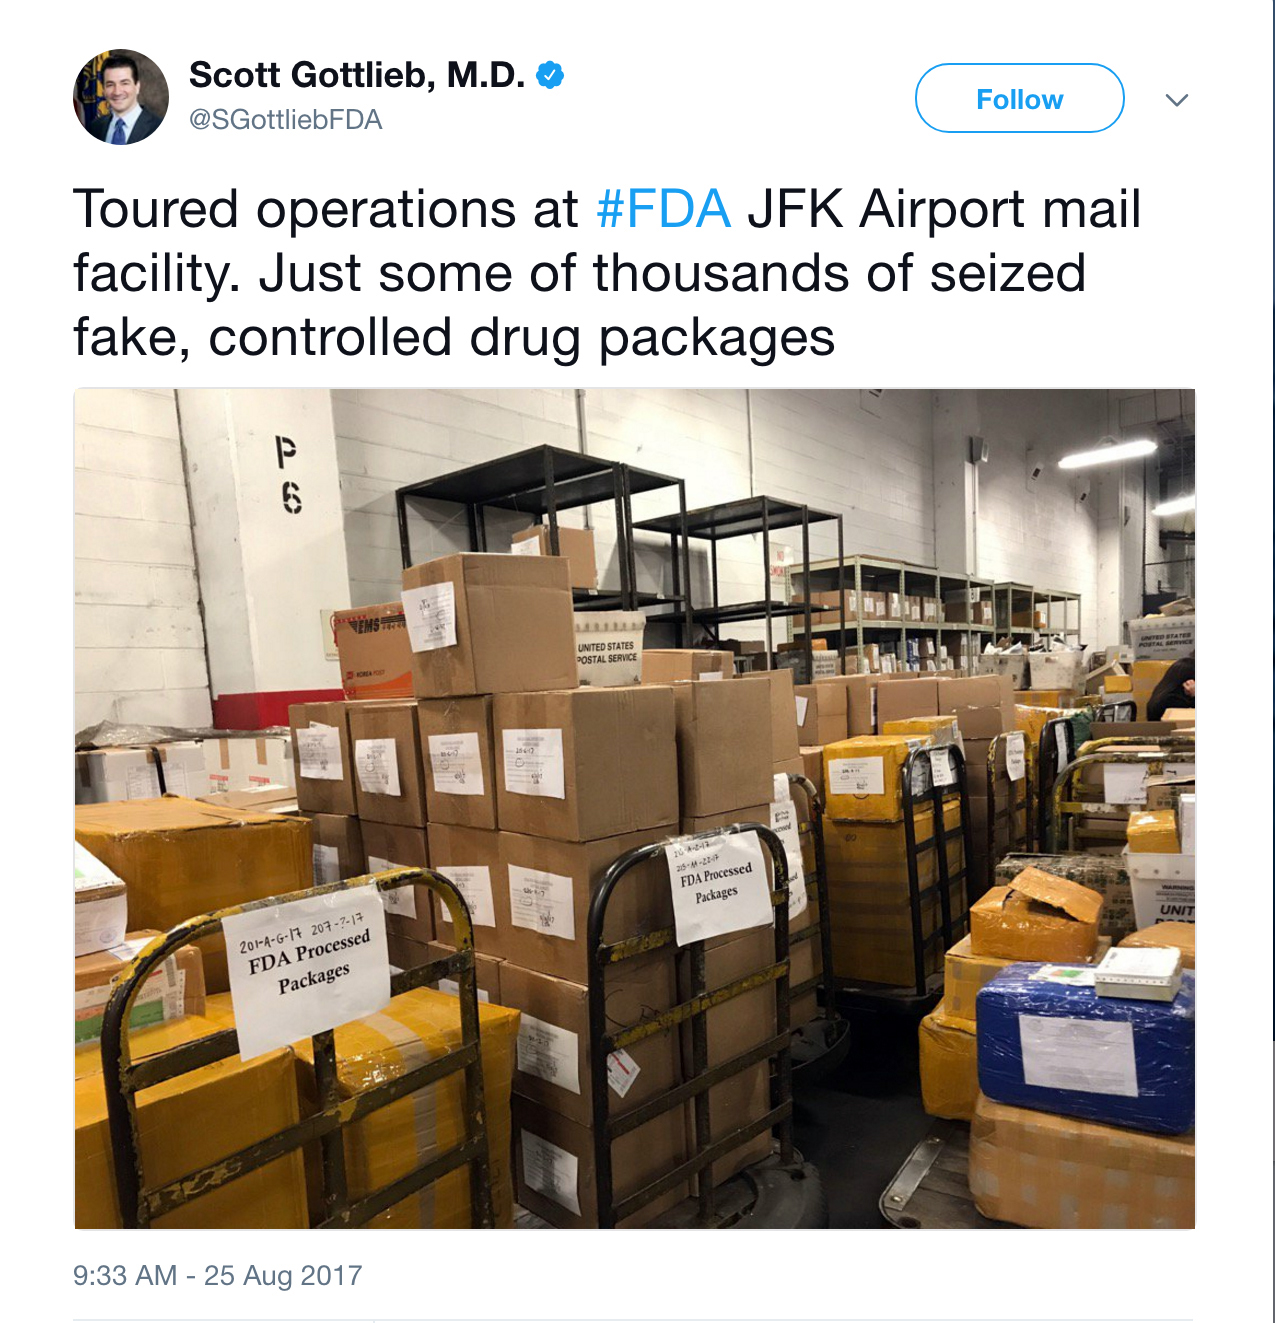 Tweet with photo showing piles of confiscated boxes